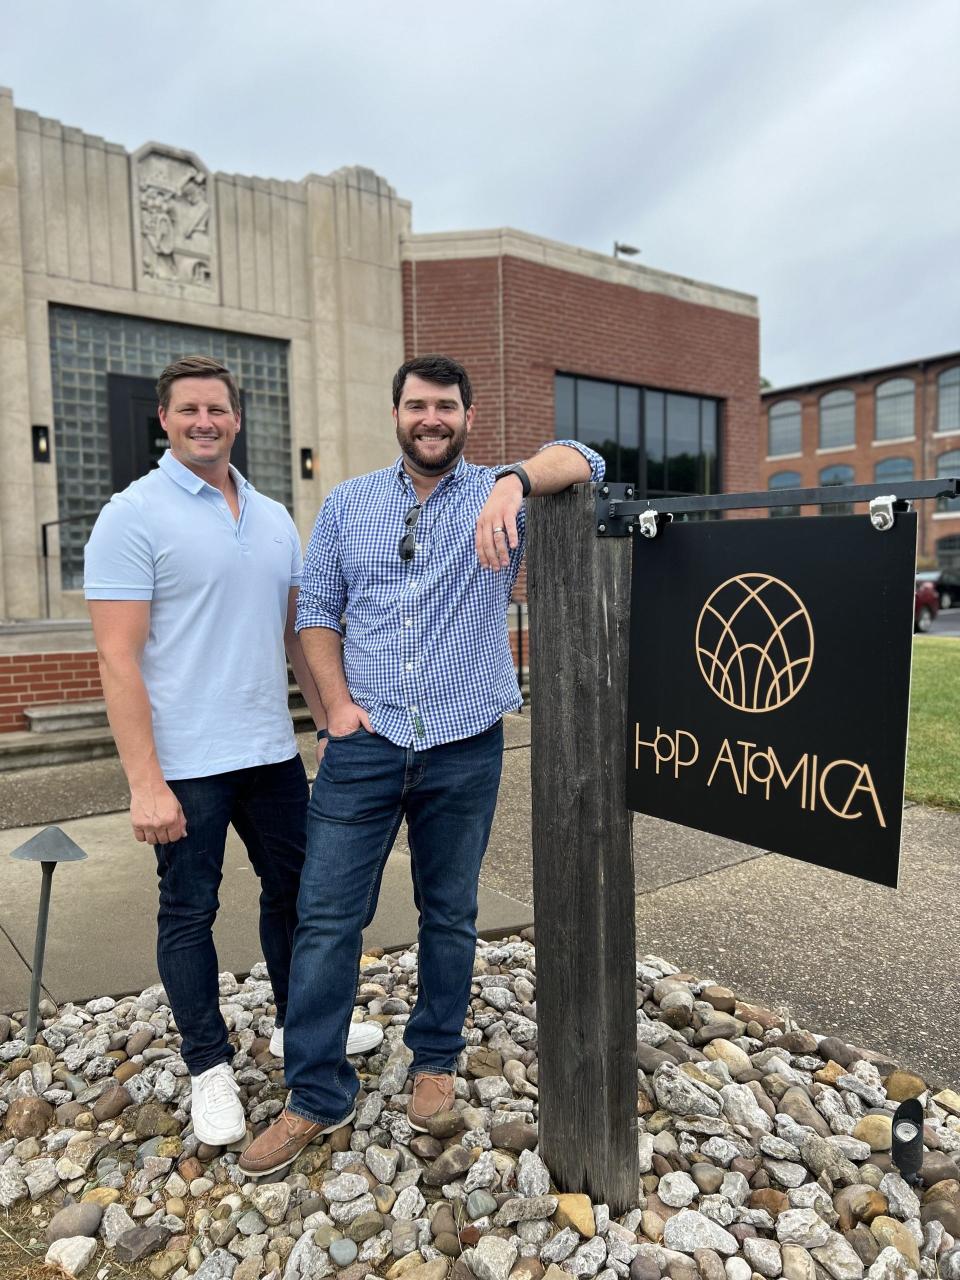 Paul Berrier and Kenneth Suchower have teamed up to open Hop Atomica, a brewery, distillery and wood-fired pizzeria.